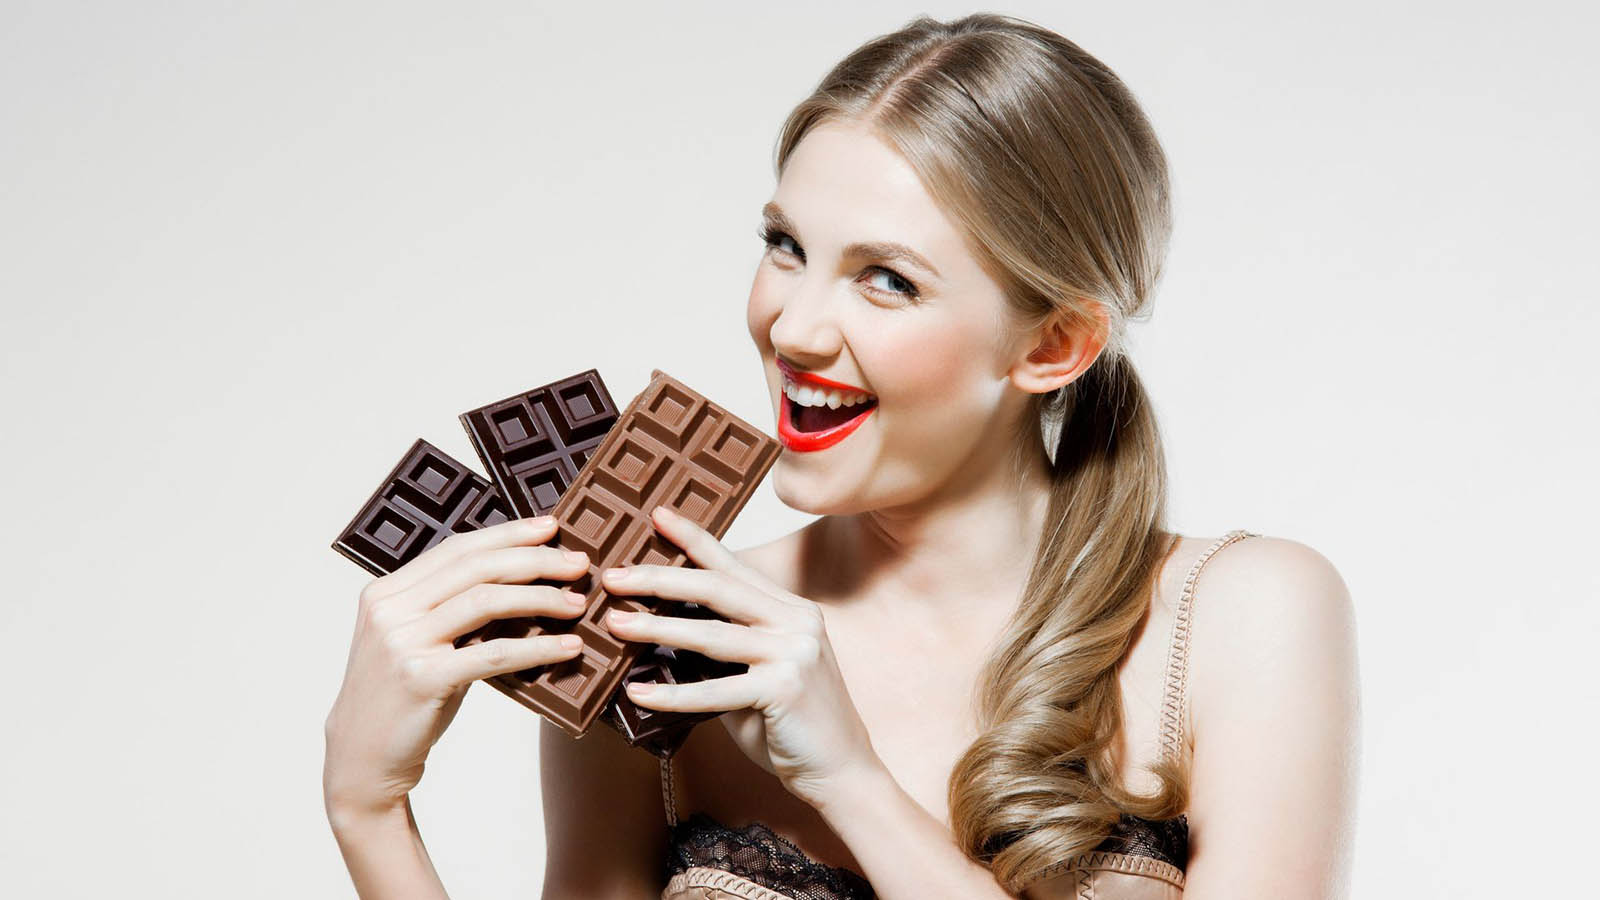 Rate These 15 Images and We Will Tell You What Your Future Looks Like Woman Eating Chocolate Bars